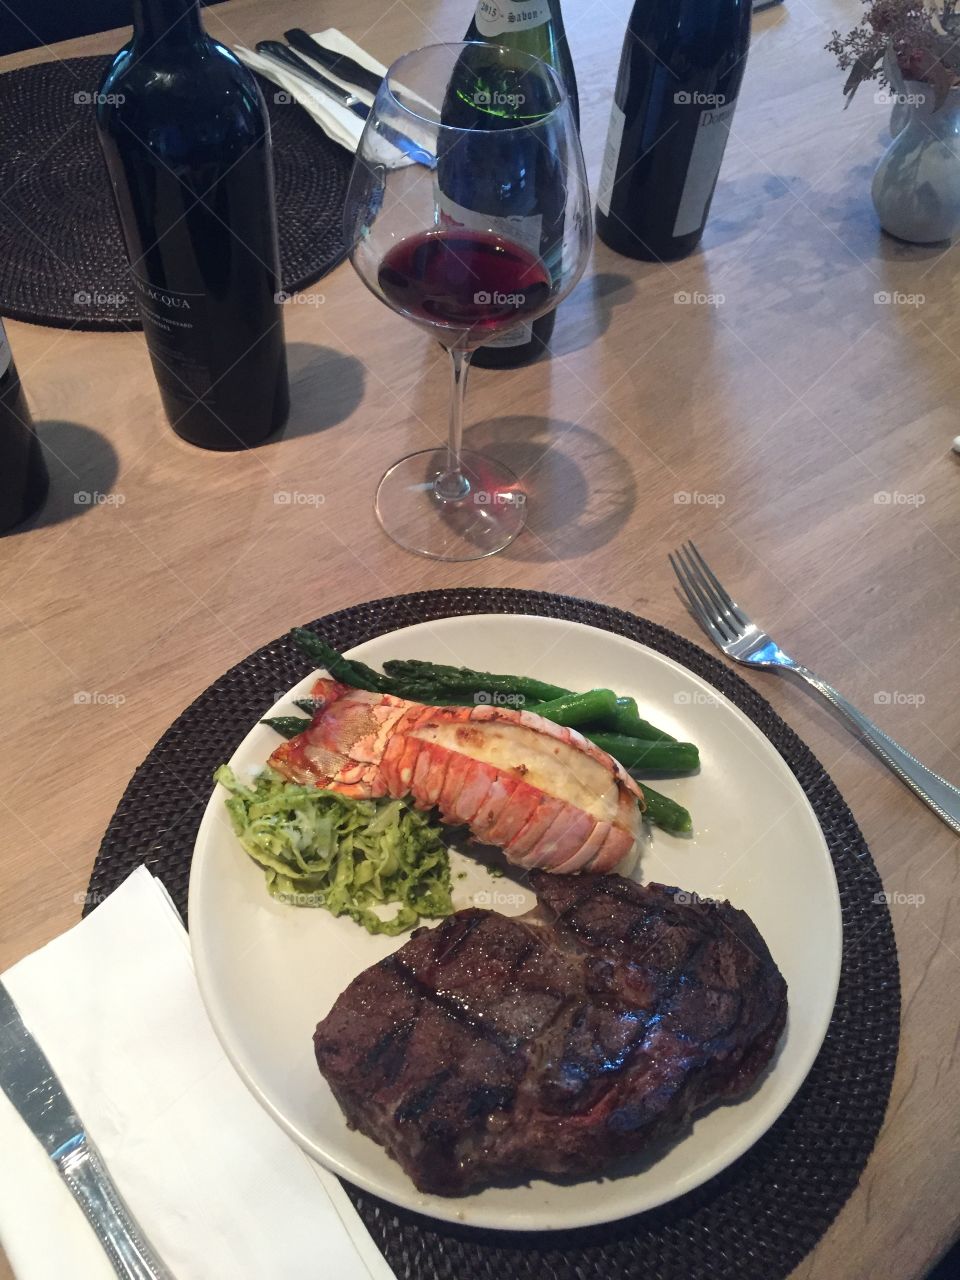 Stake and lobster dinner